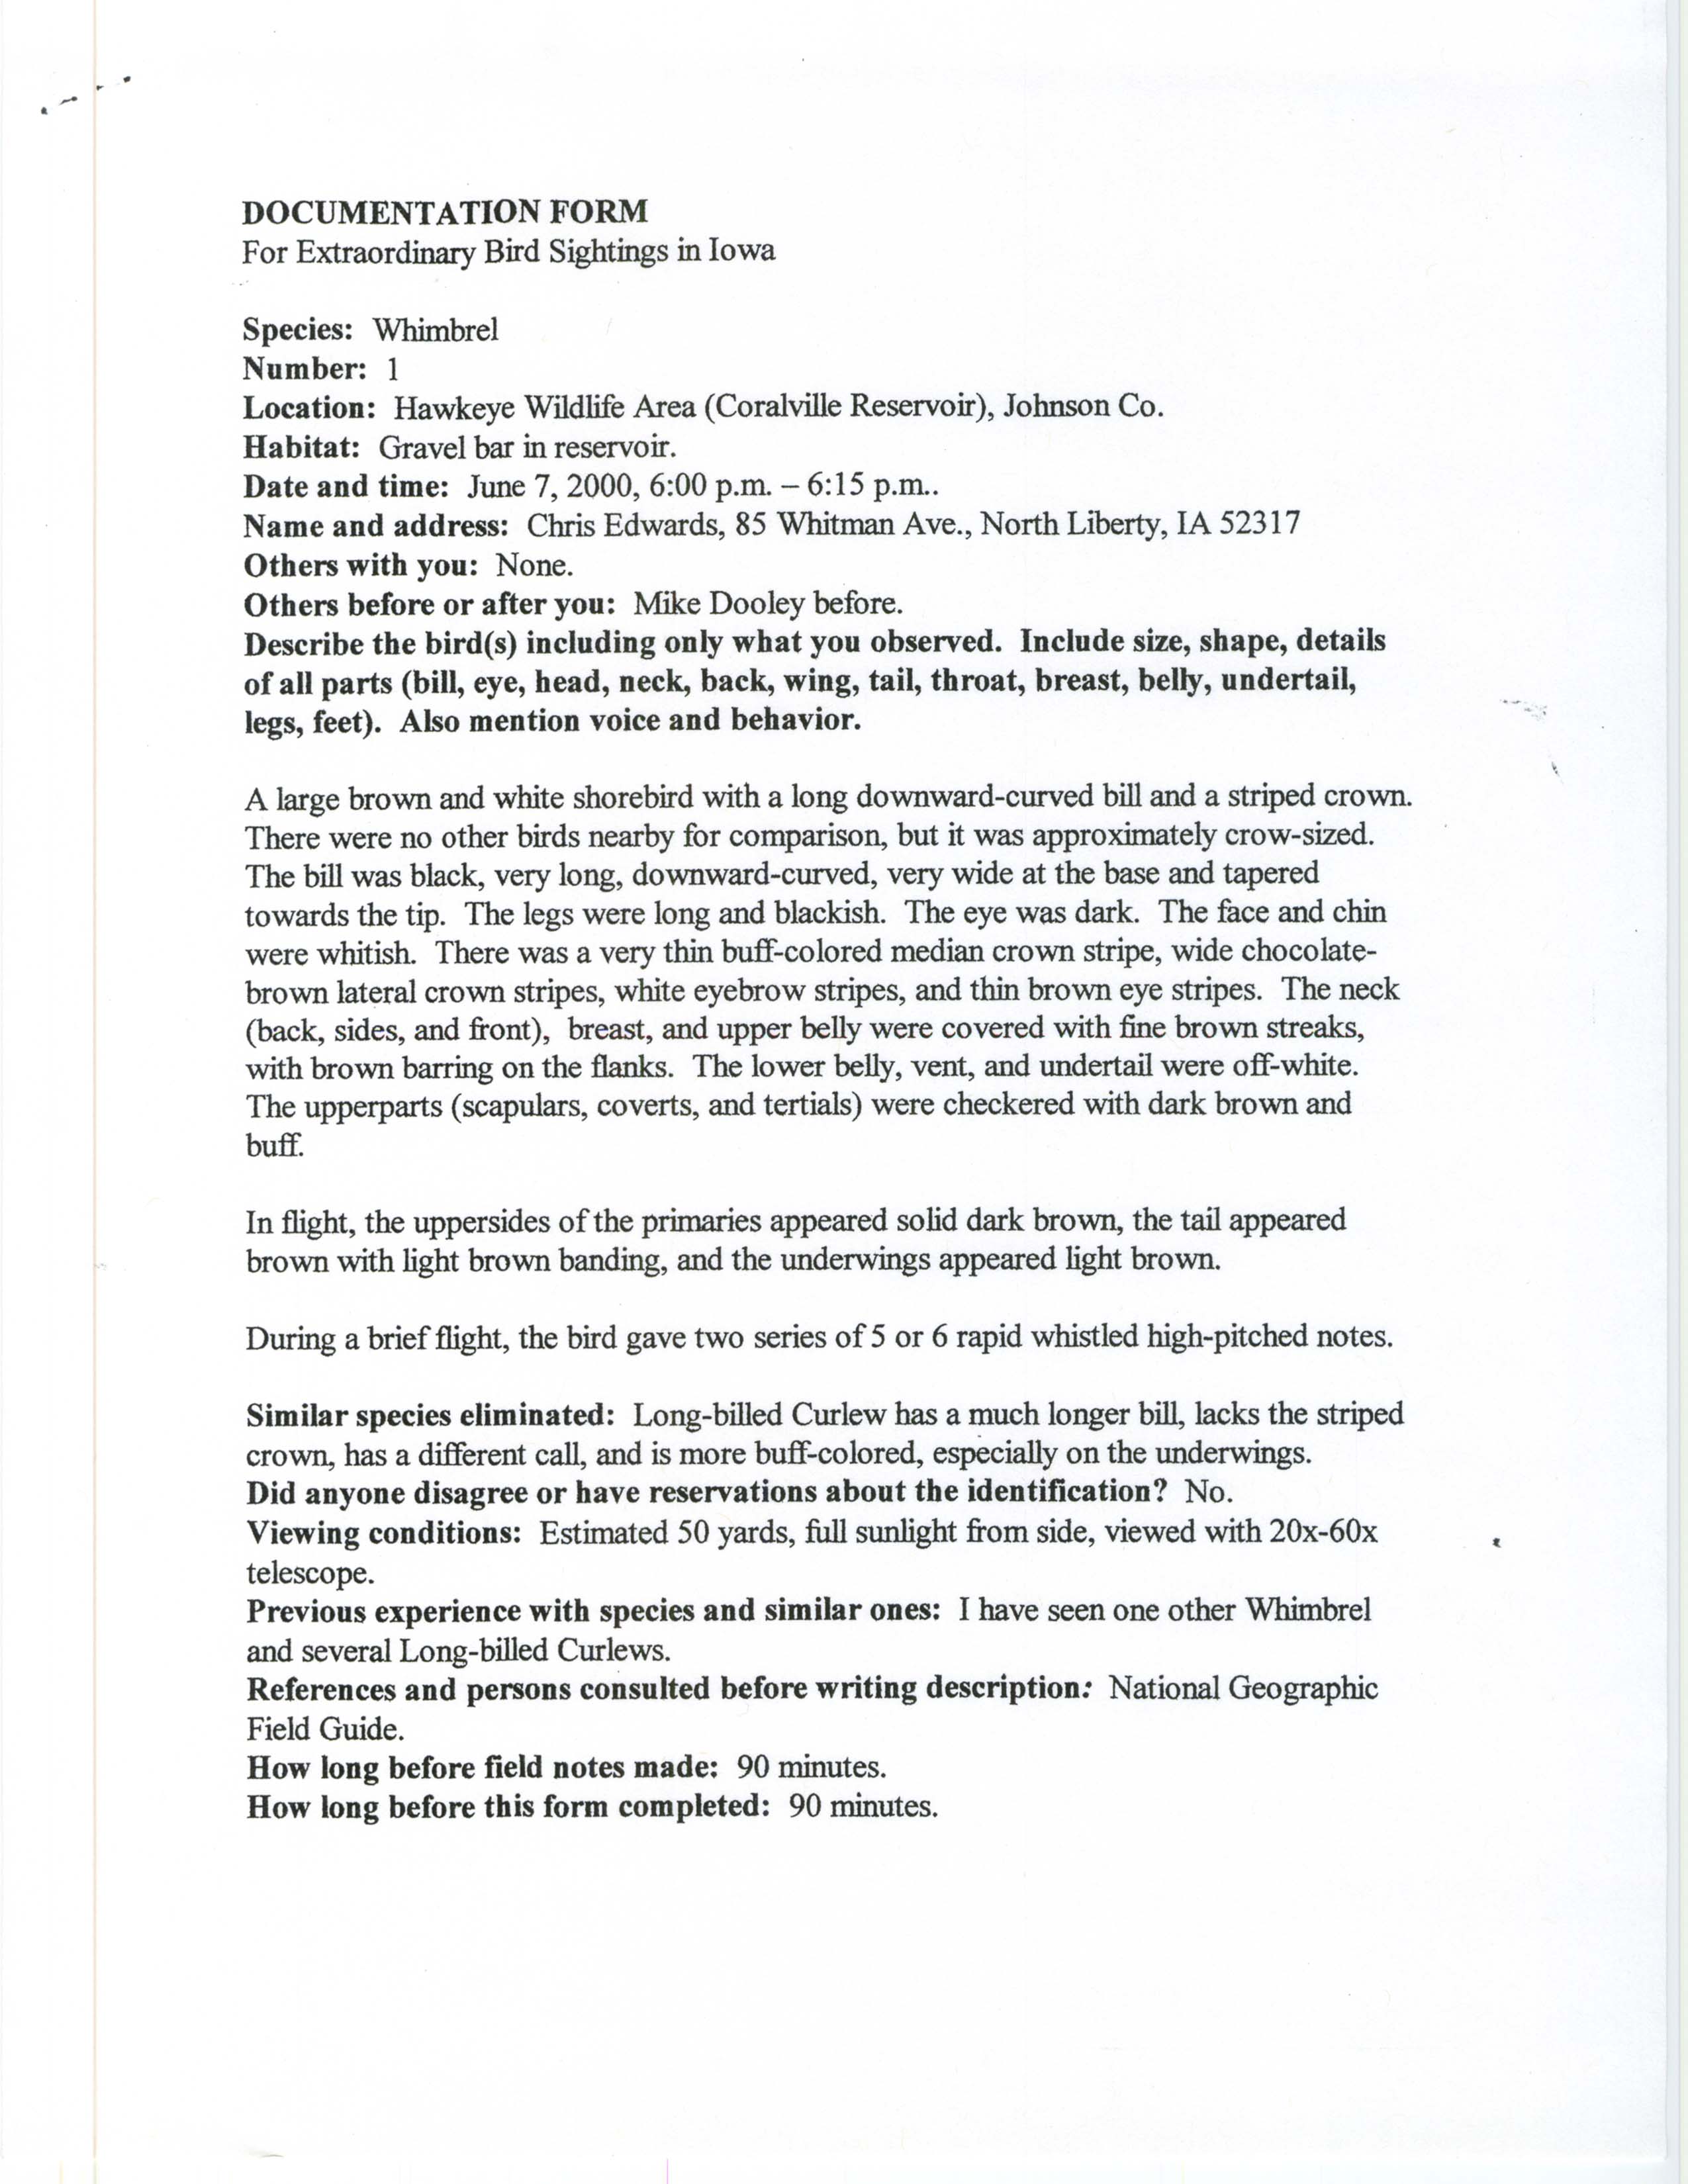 Documentation form for extraordinary bird sightings in Iowa, Whimbrel, Chris Edwards, June 7, 2000